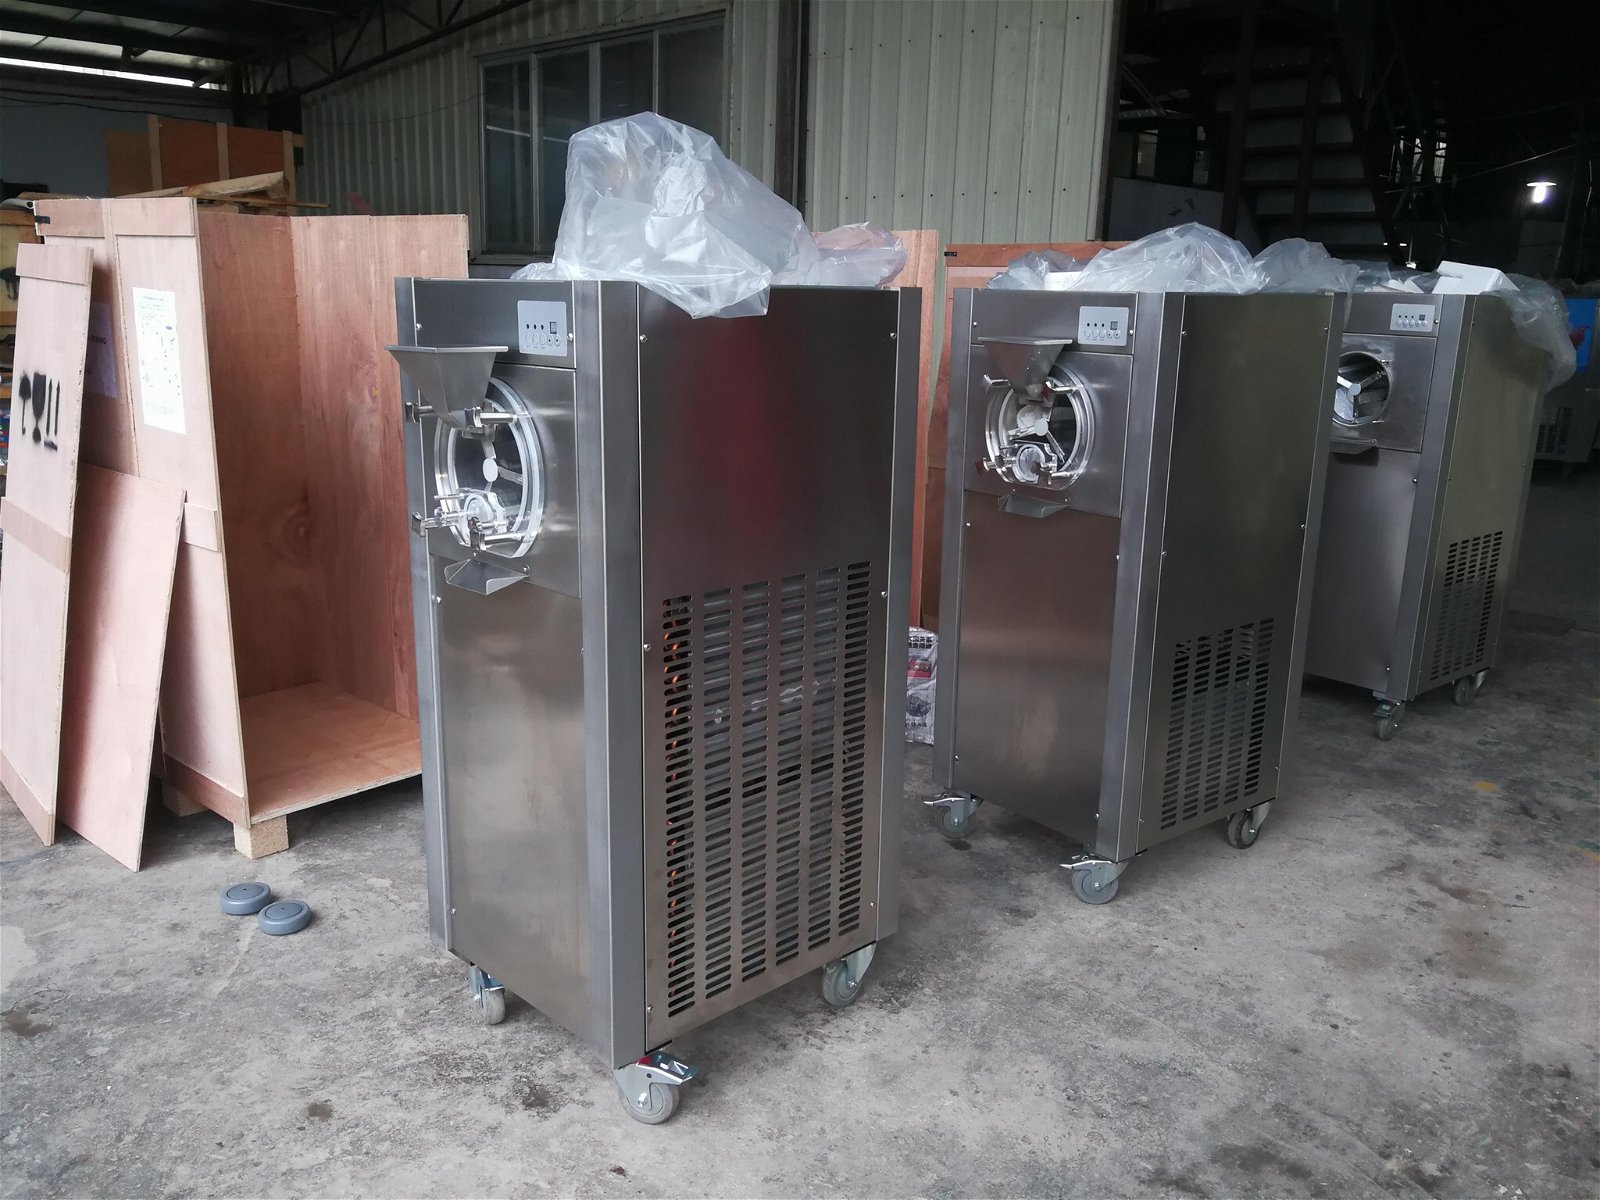 Hourly 20 Liters Commercial Gelato Equipment For Sale 2